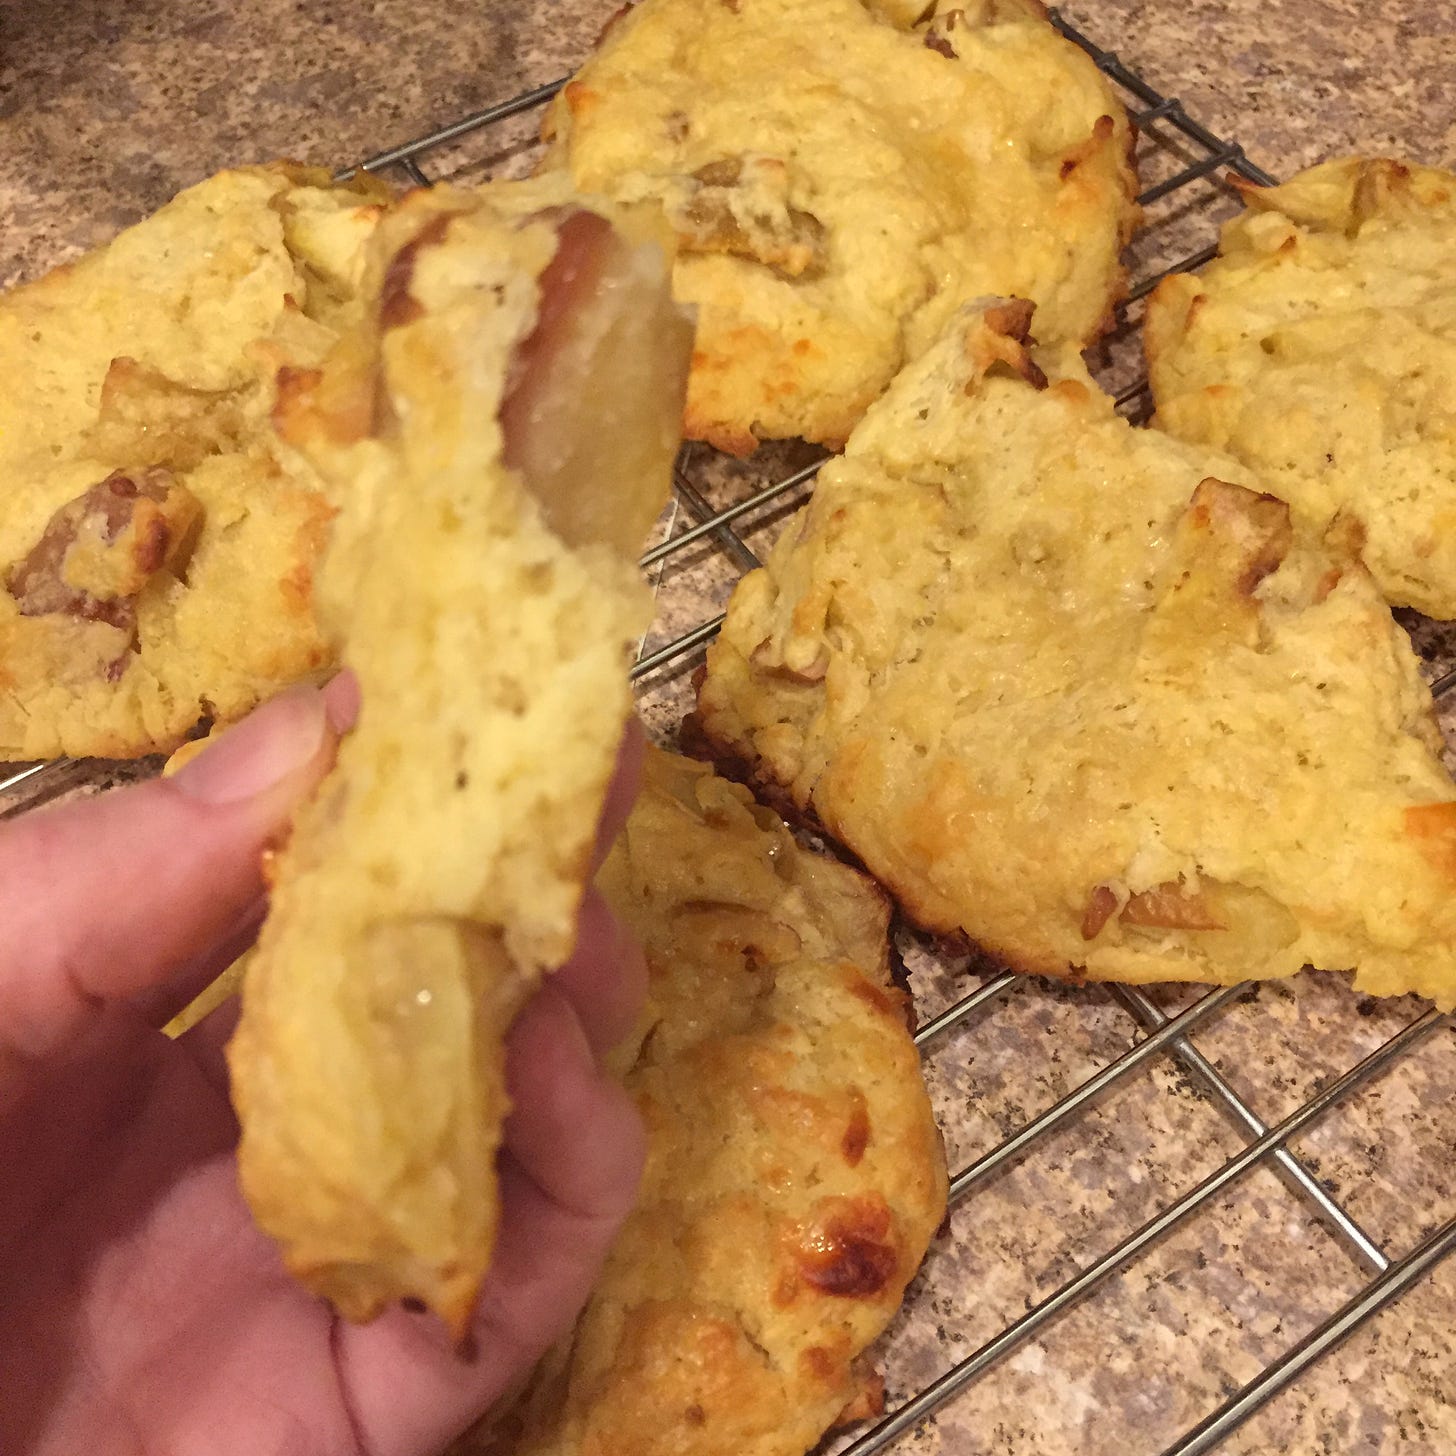 On a cooling rack are a few flattish scones, with browned edges and pieces of apple. In the foreground, my hand holds one of the scones, broken in half.